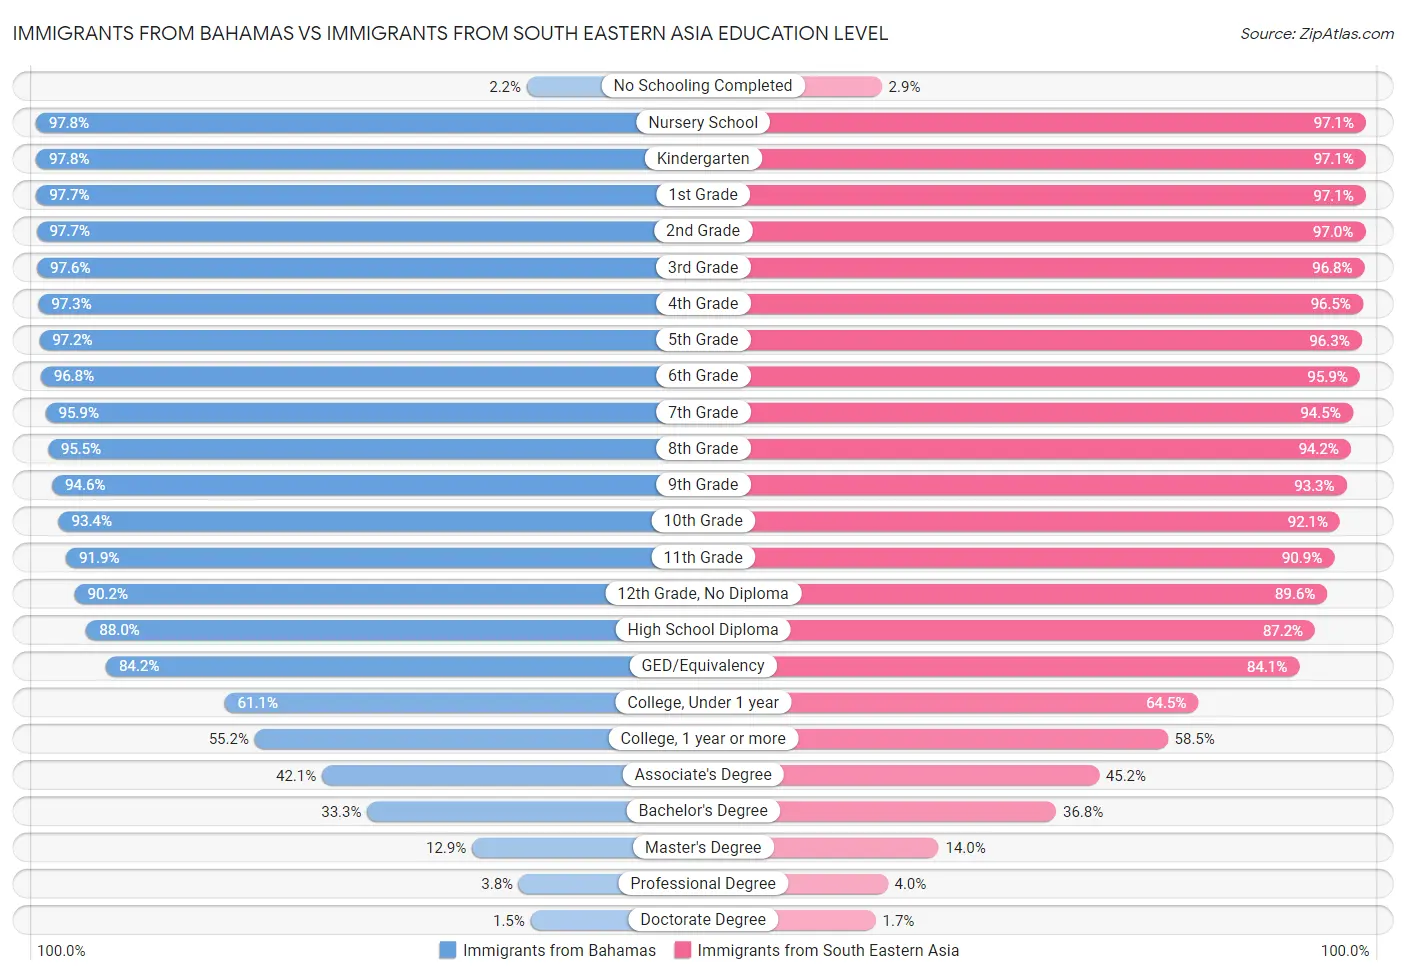 Immigrants from Bahamas vs Immigrants from South Eastern Asia Education Level